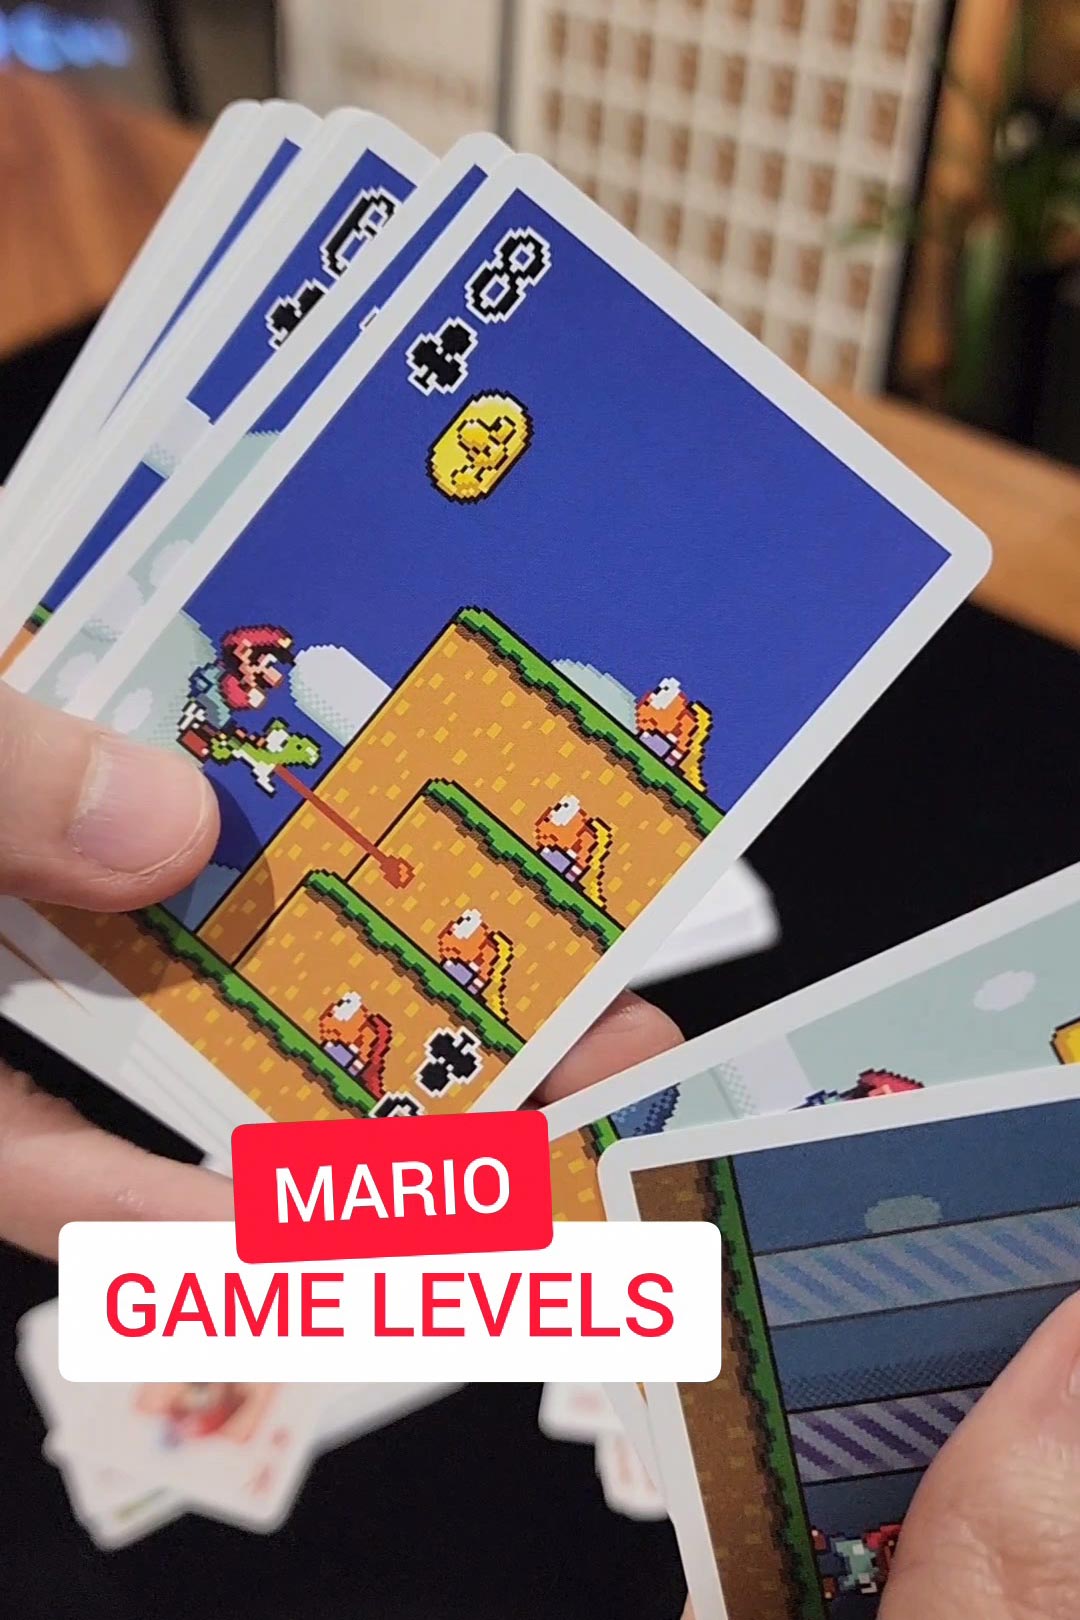 Unboxing the Nintendo Game Levels Playing Cards